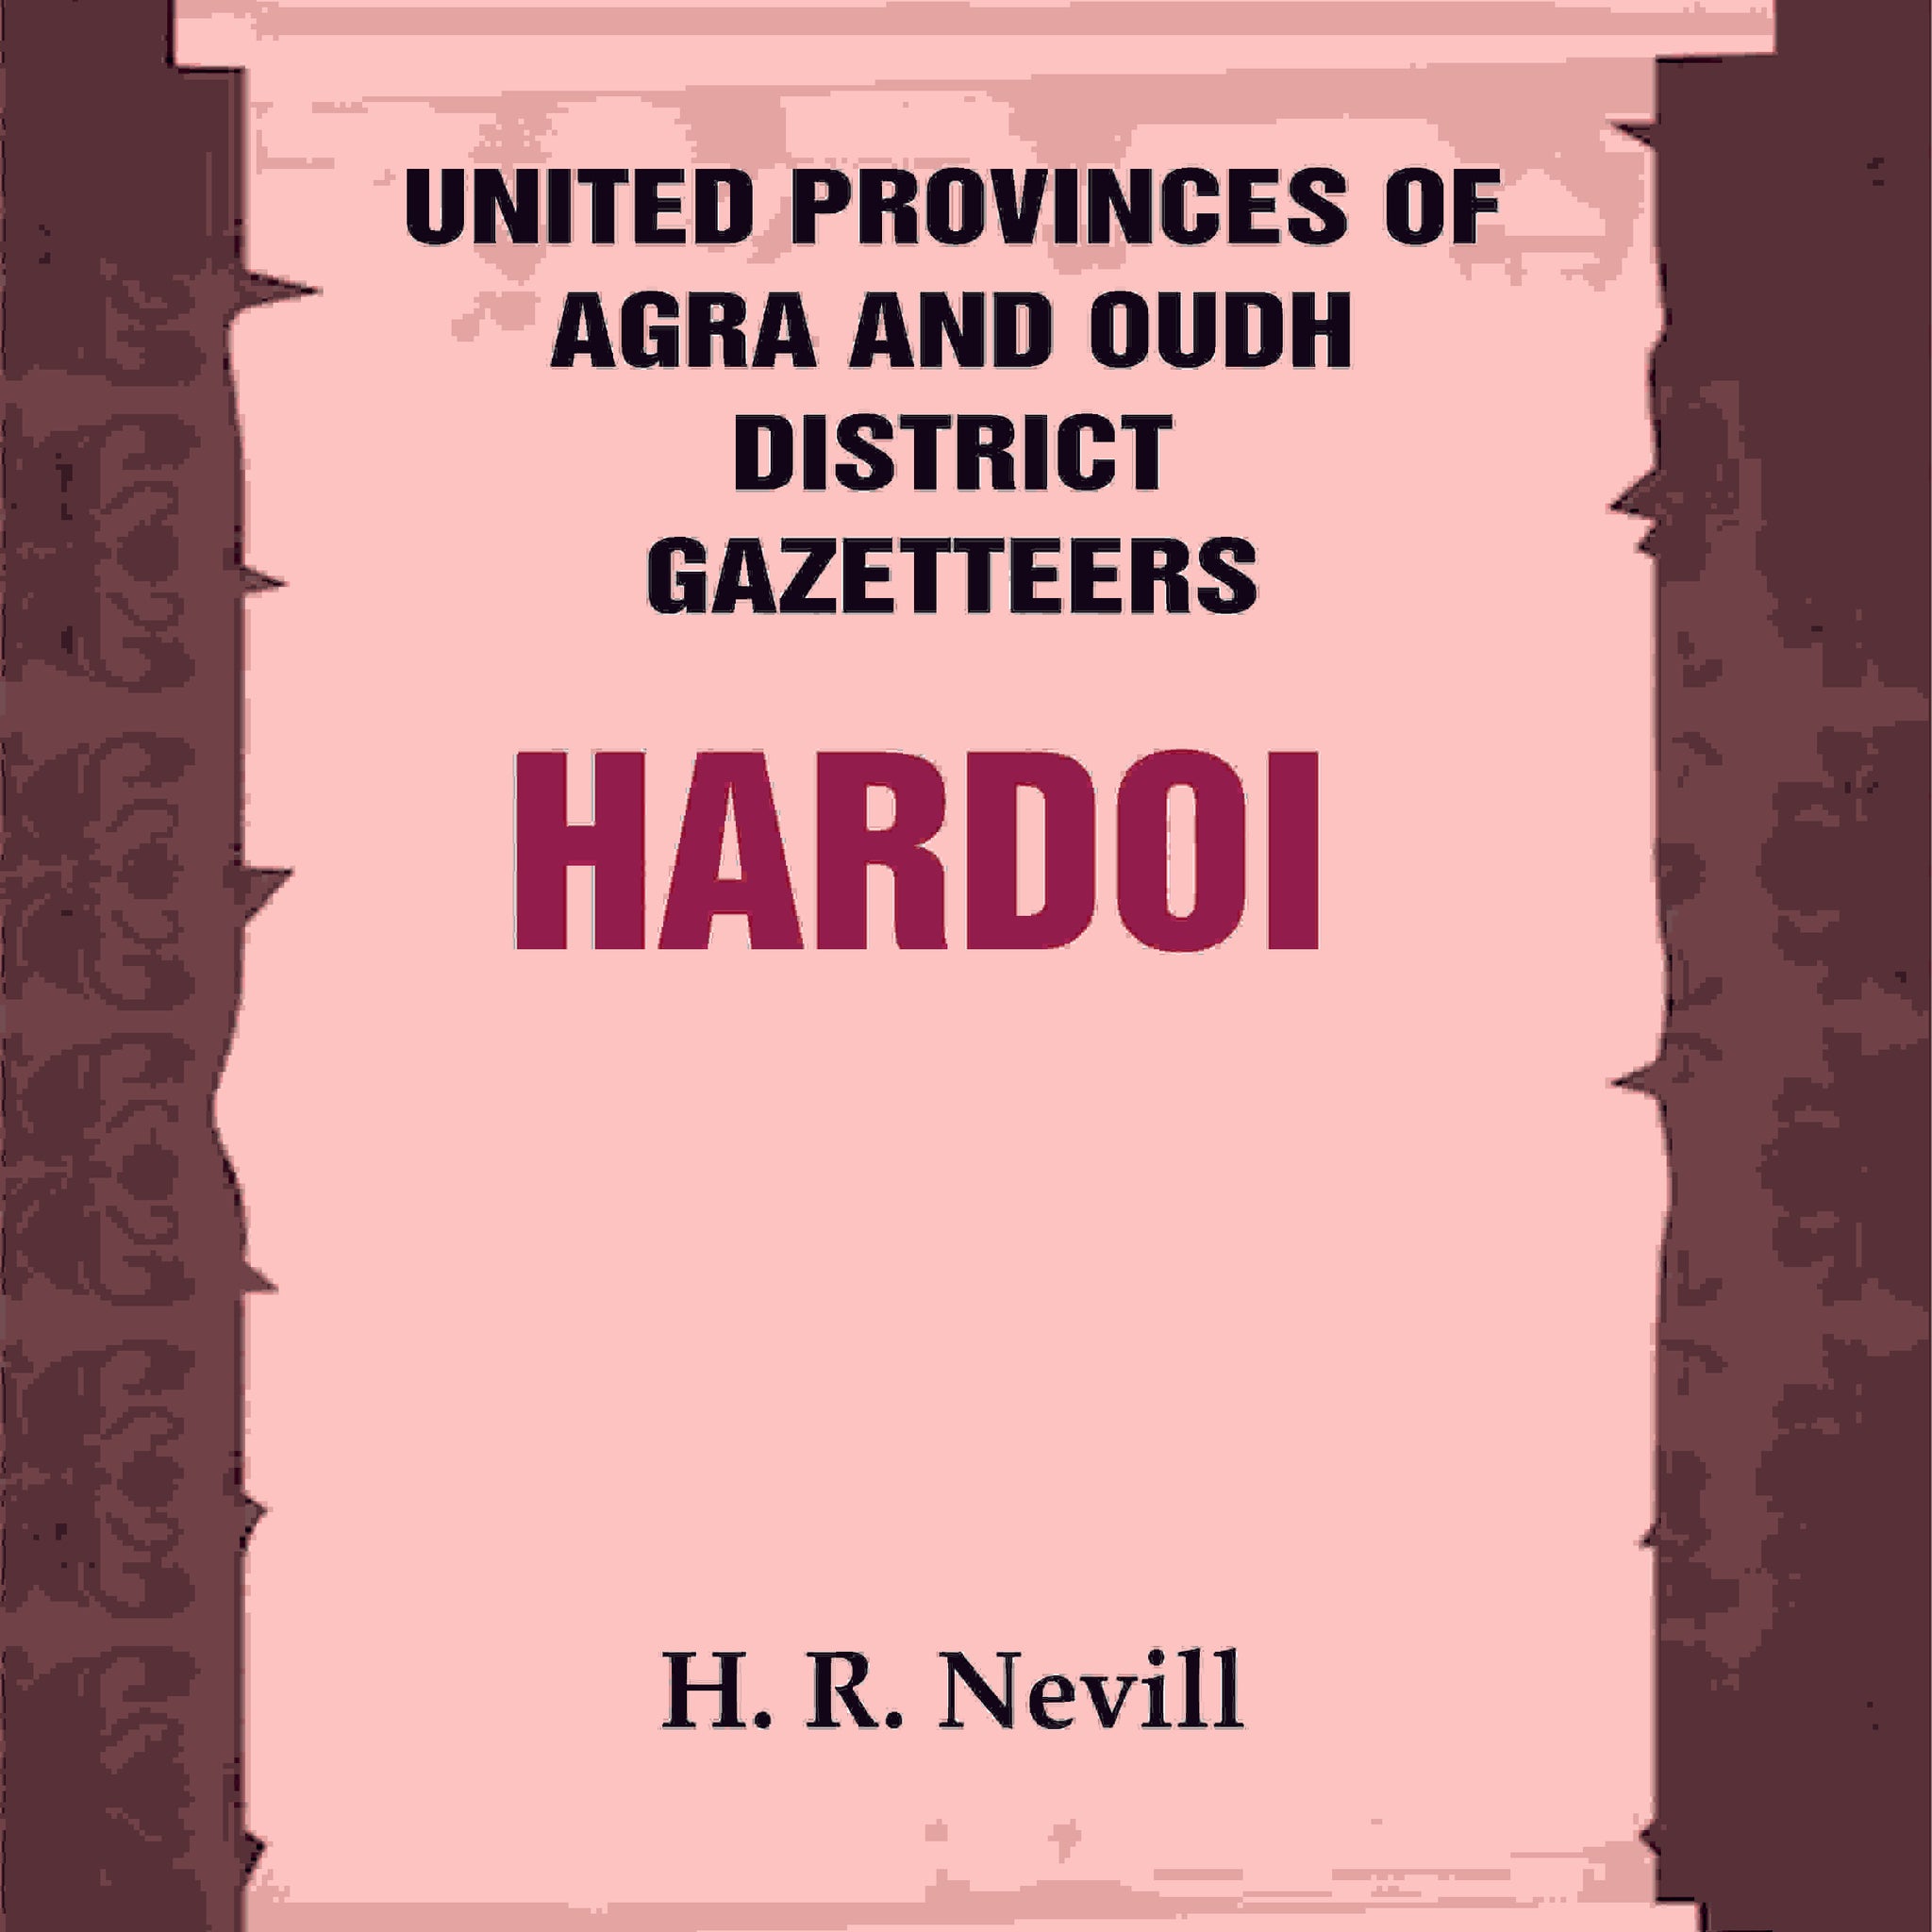 United Provinces of Agra and Oudh District Gazetteers: Hardoi